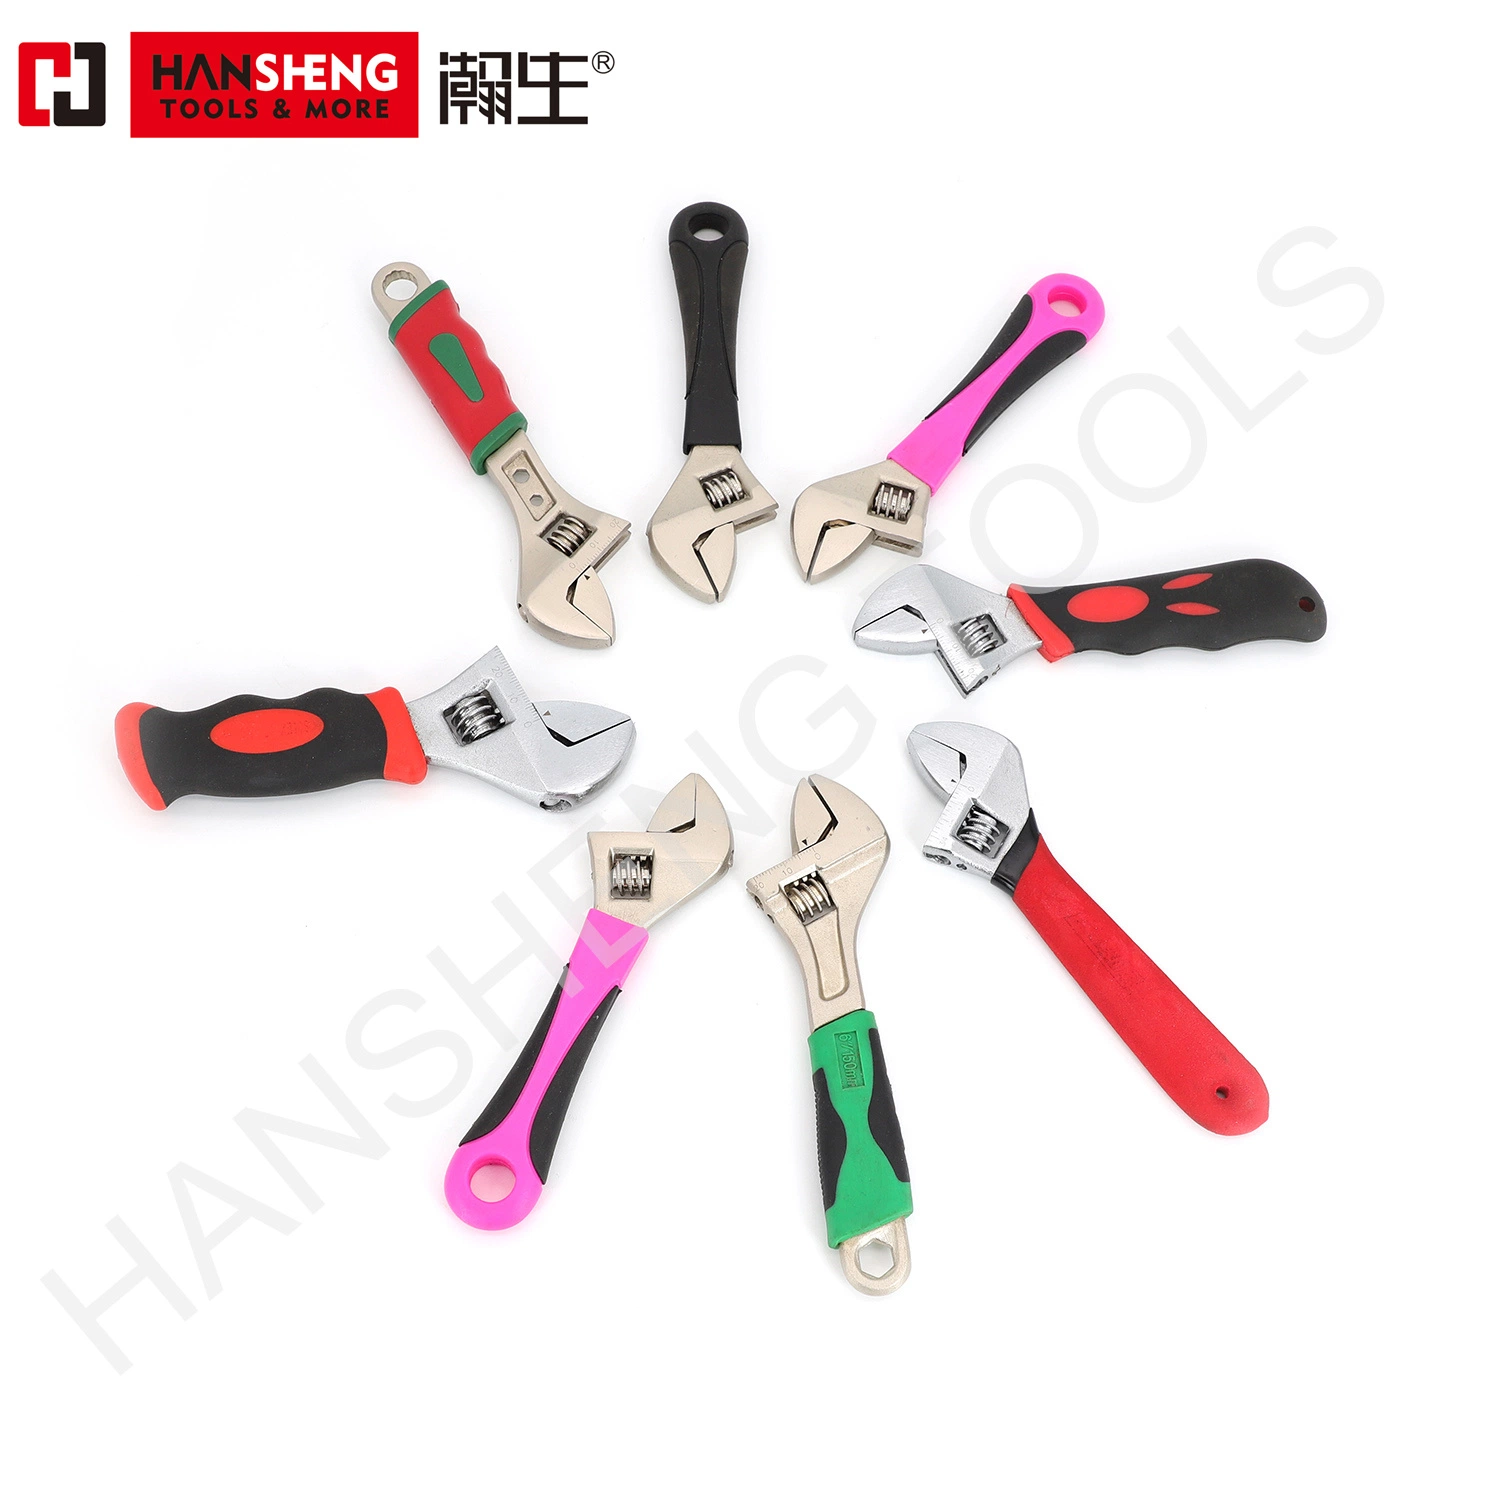 Professional Adjustable Wrench, Hand Tools,Hardware,Made of Carbon Steel, Chrome, Nickel, Black Nickel or Pearl Nickel Plated, with PVC Hanlde, One-Hand Operate